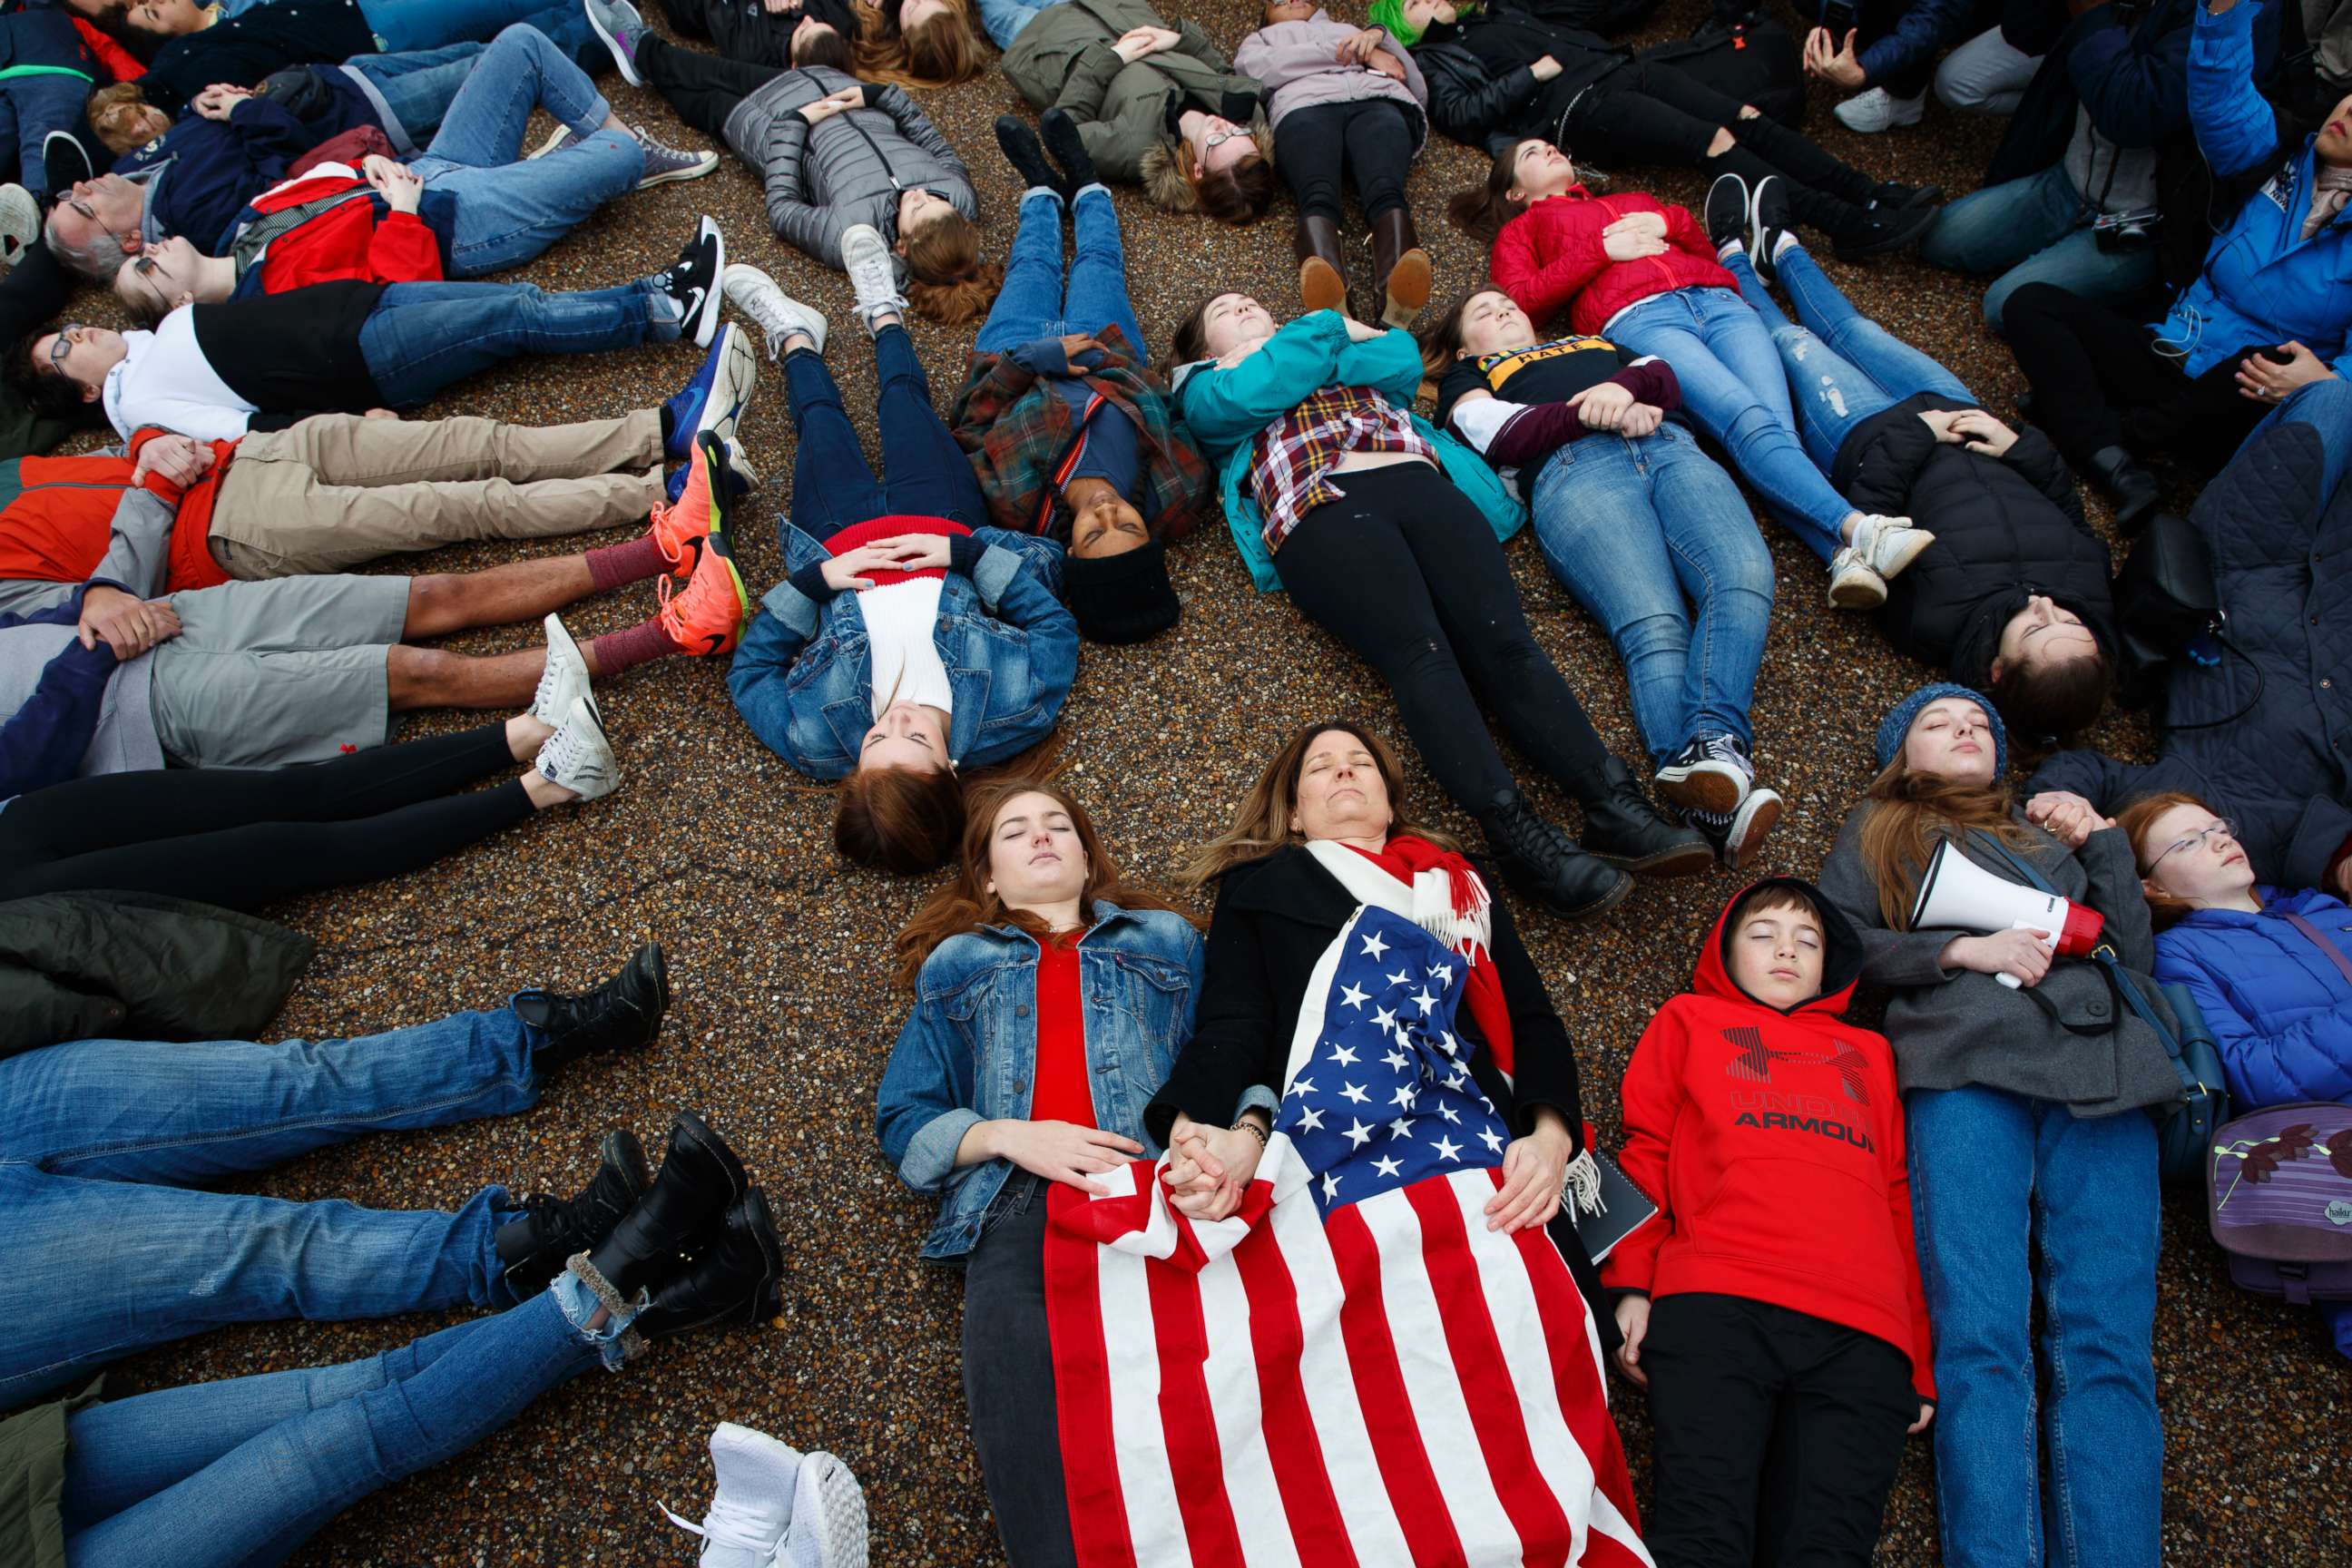 PHOTO: Abby Spangler and her daughter Eleanor Spangler Neuchterlein, 16, hold hands as they participate in a "lie-in" during a protest in favor of gun control reform in front of the White House in Washington, D.C., Feb. 19, 2018.